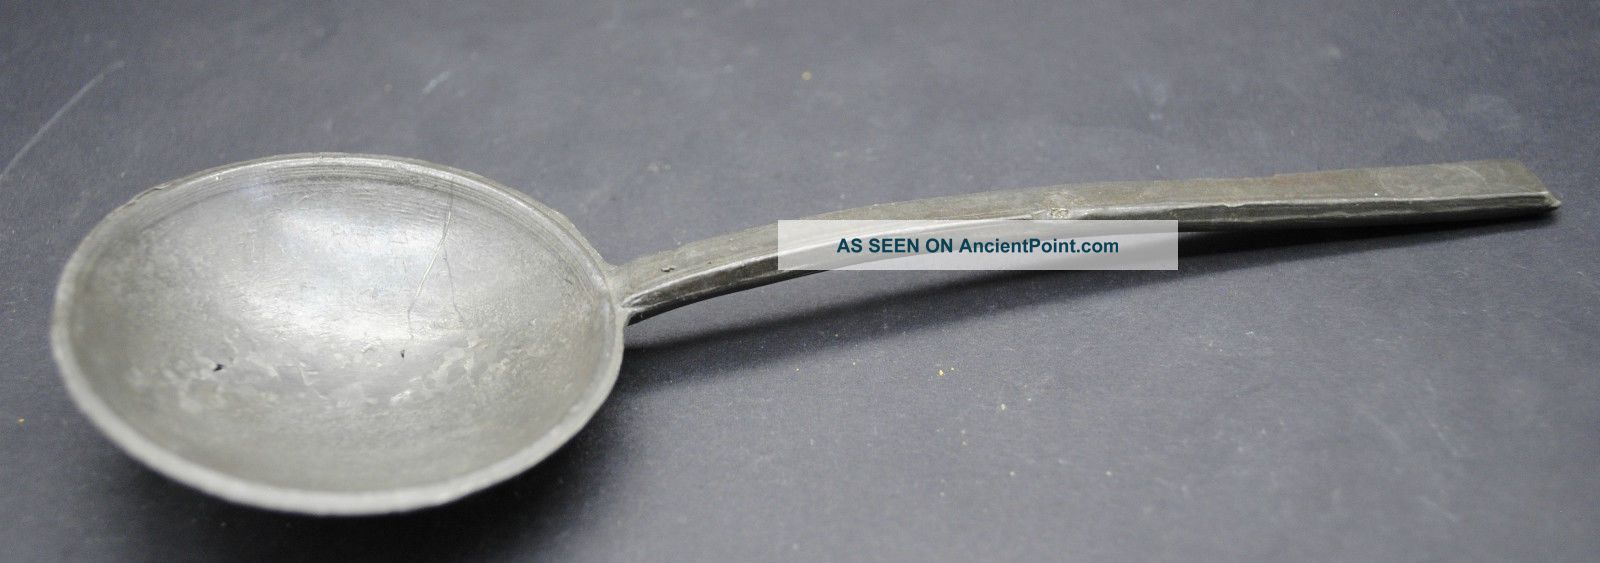 Tudor Pewter Spoon Thames Foreshore Find Angel Makers Mark Other Antiquities photo